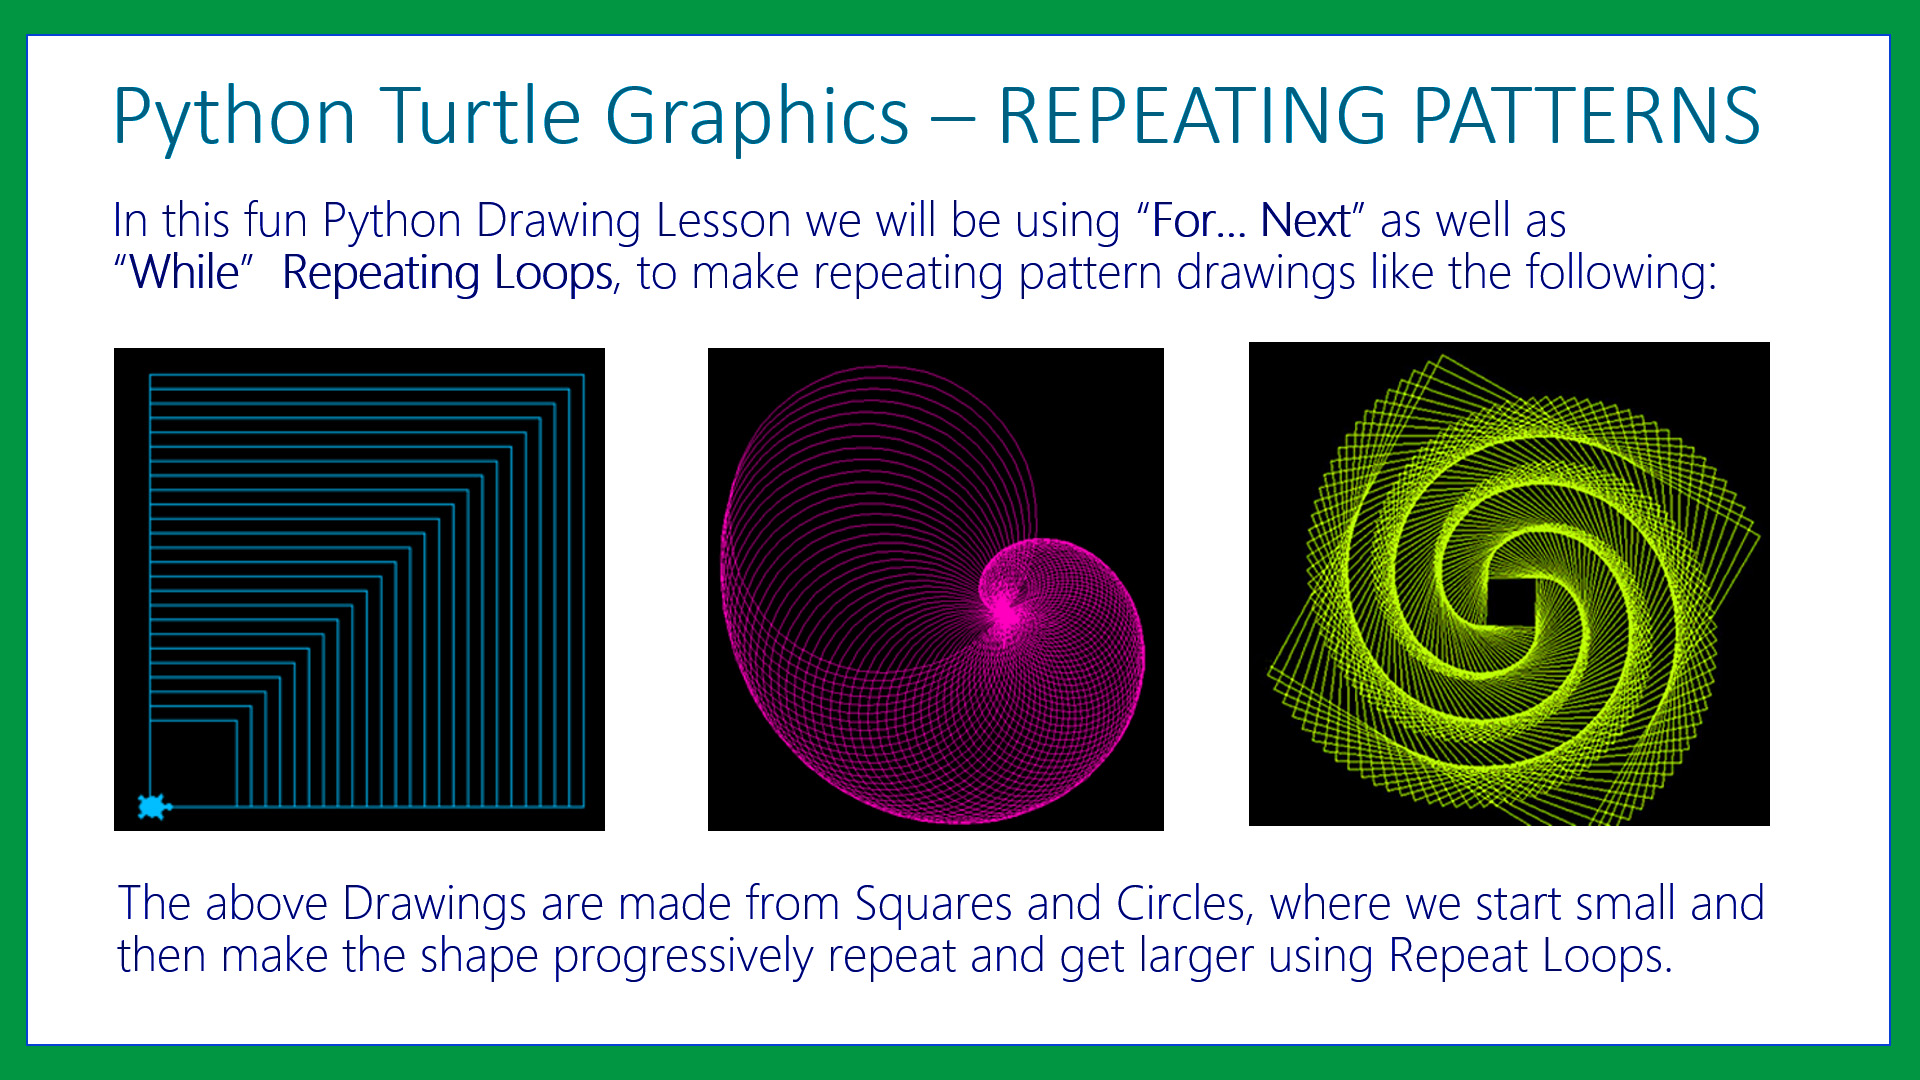 Python Turtle Graphics Drawing Repeating Patterns Passy World of ICT